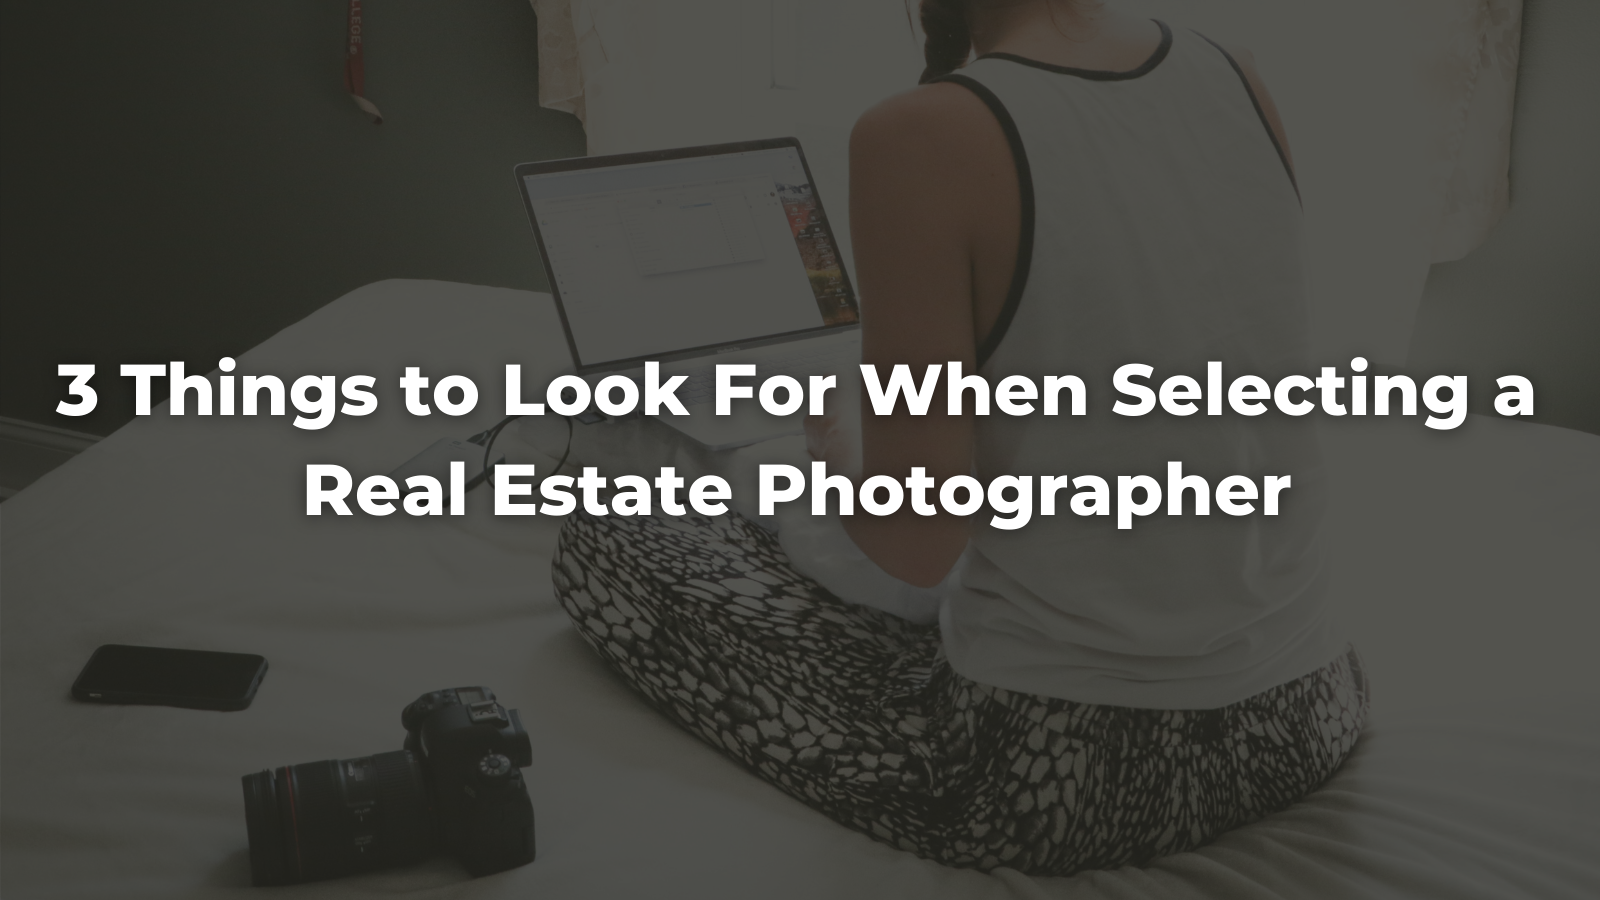 3 Things to Look For When Selecting a Real Estate Photographer